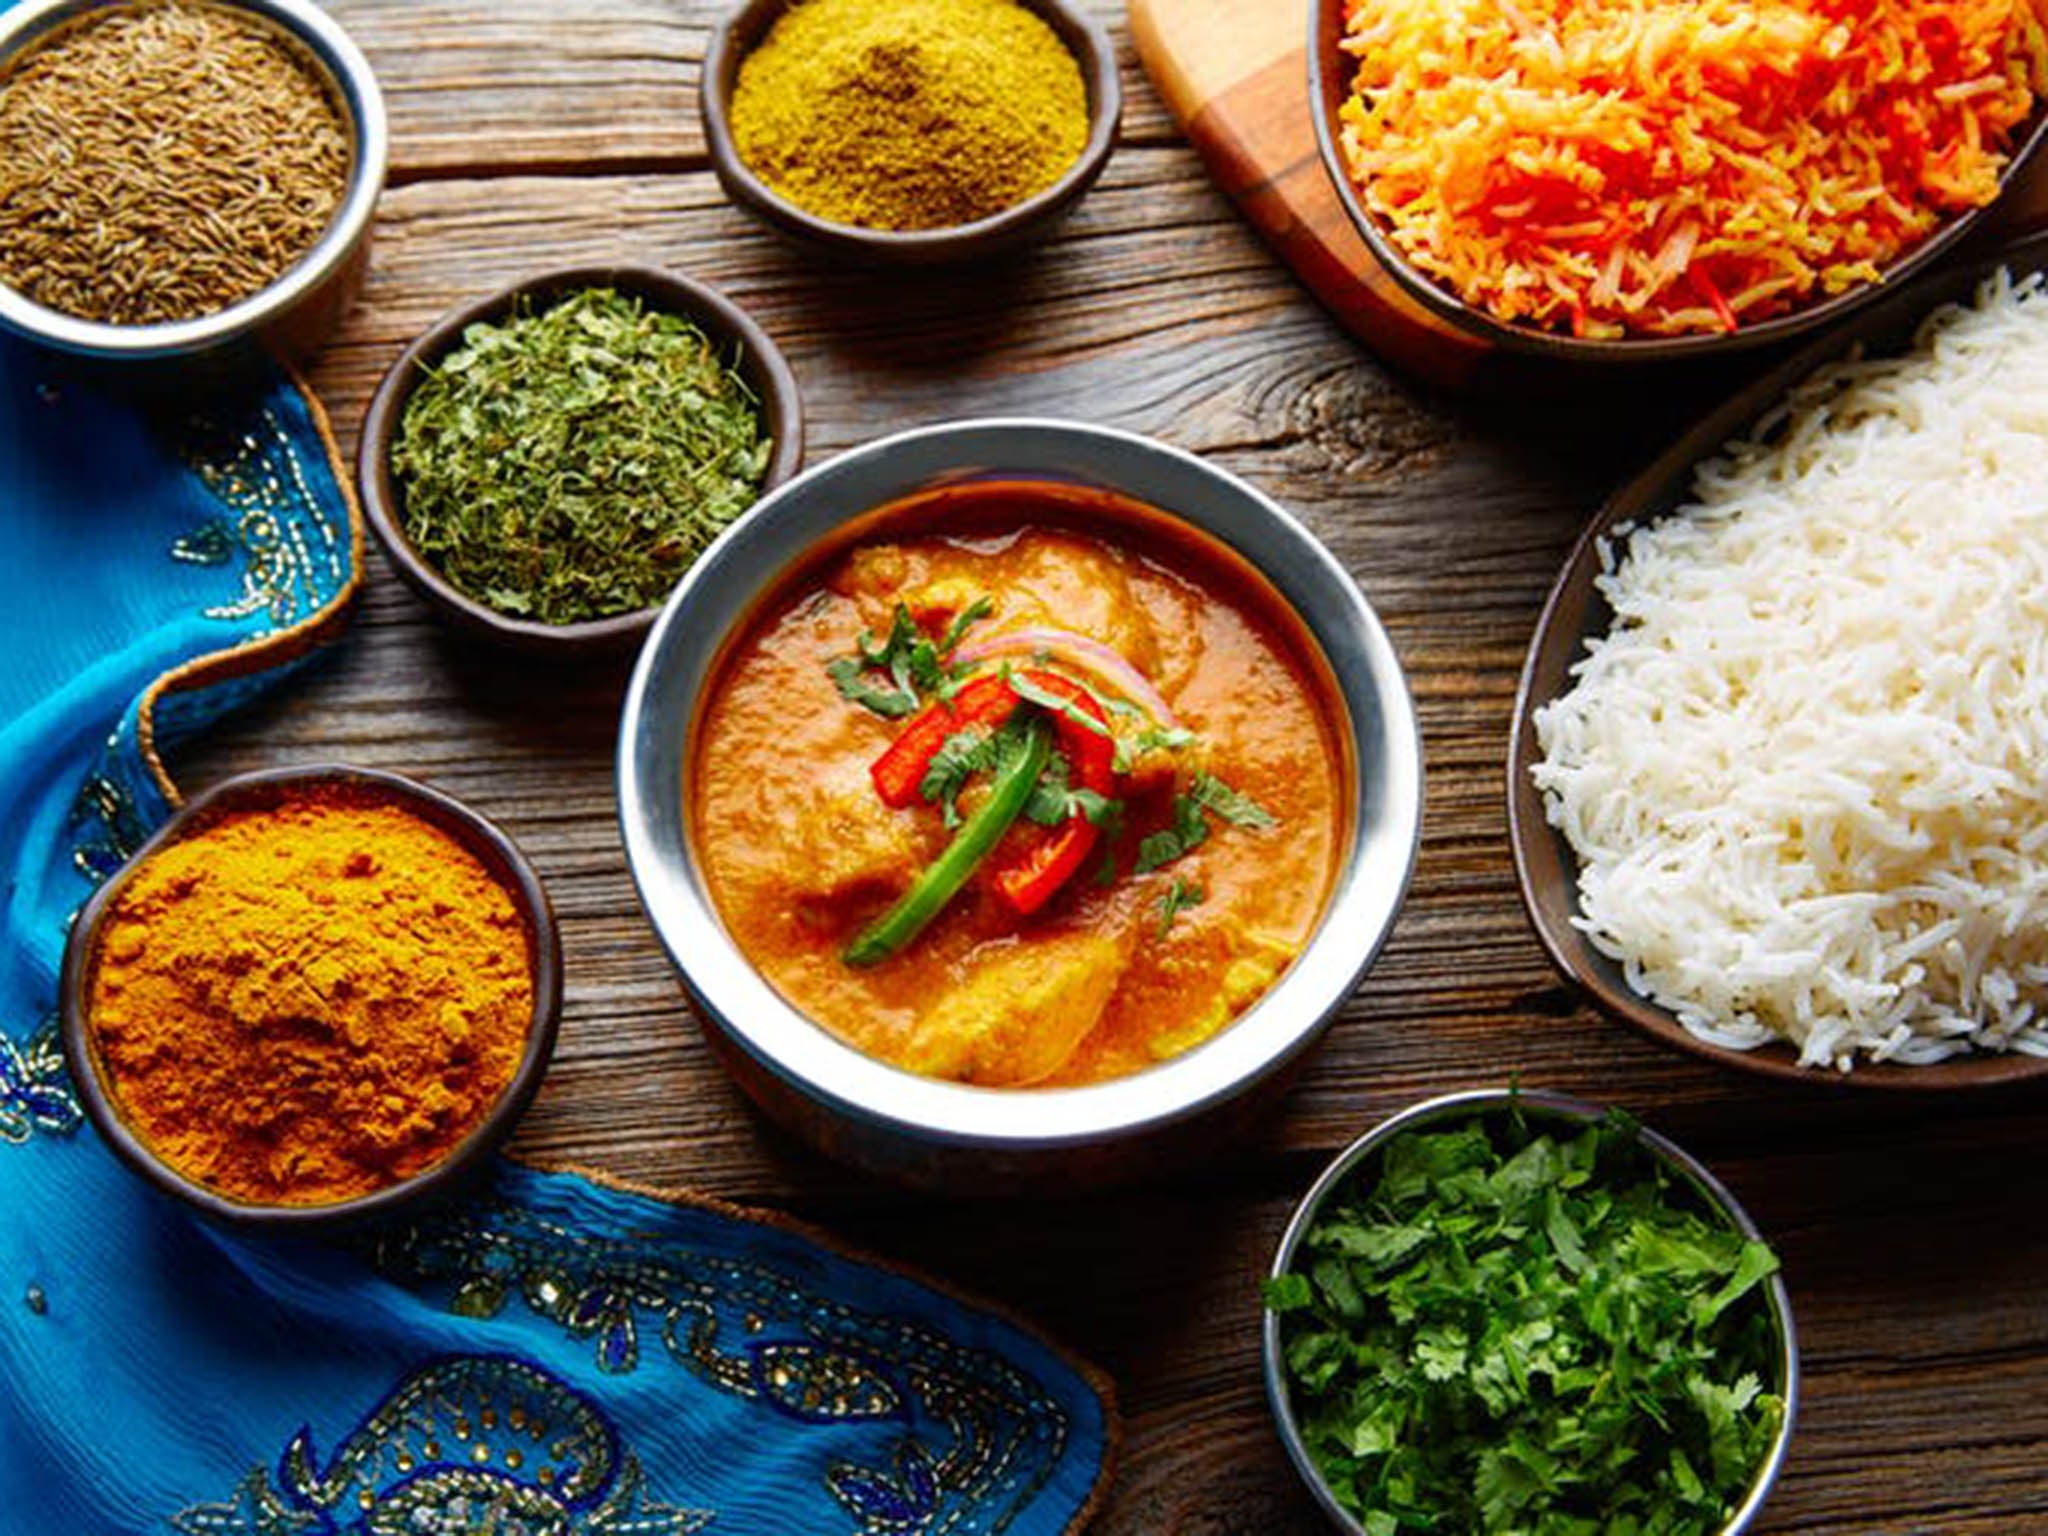 Curry is officially the most Instagrammed food